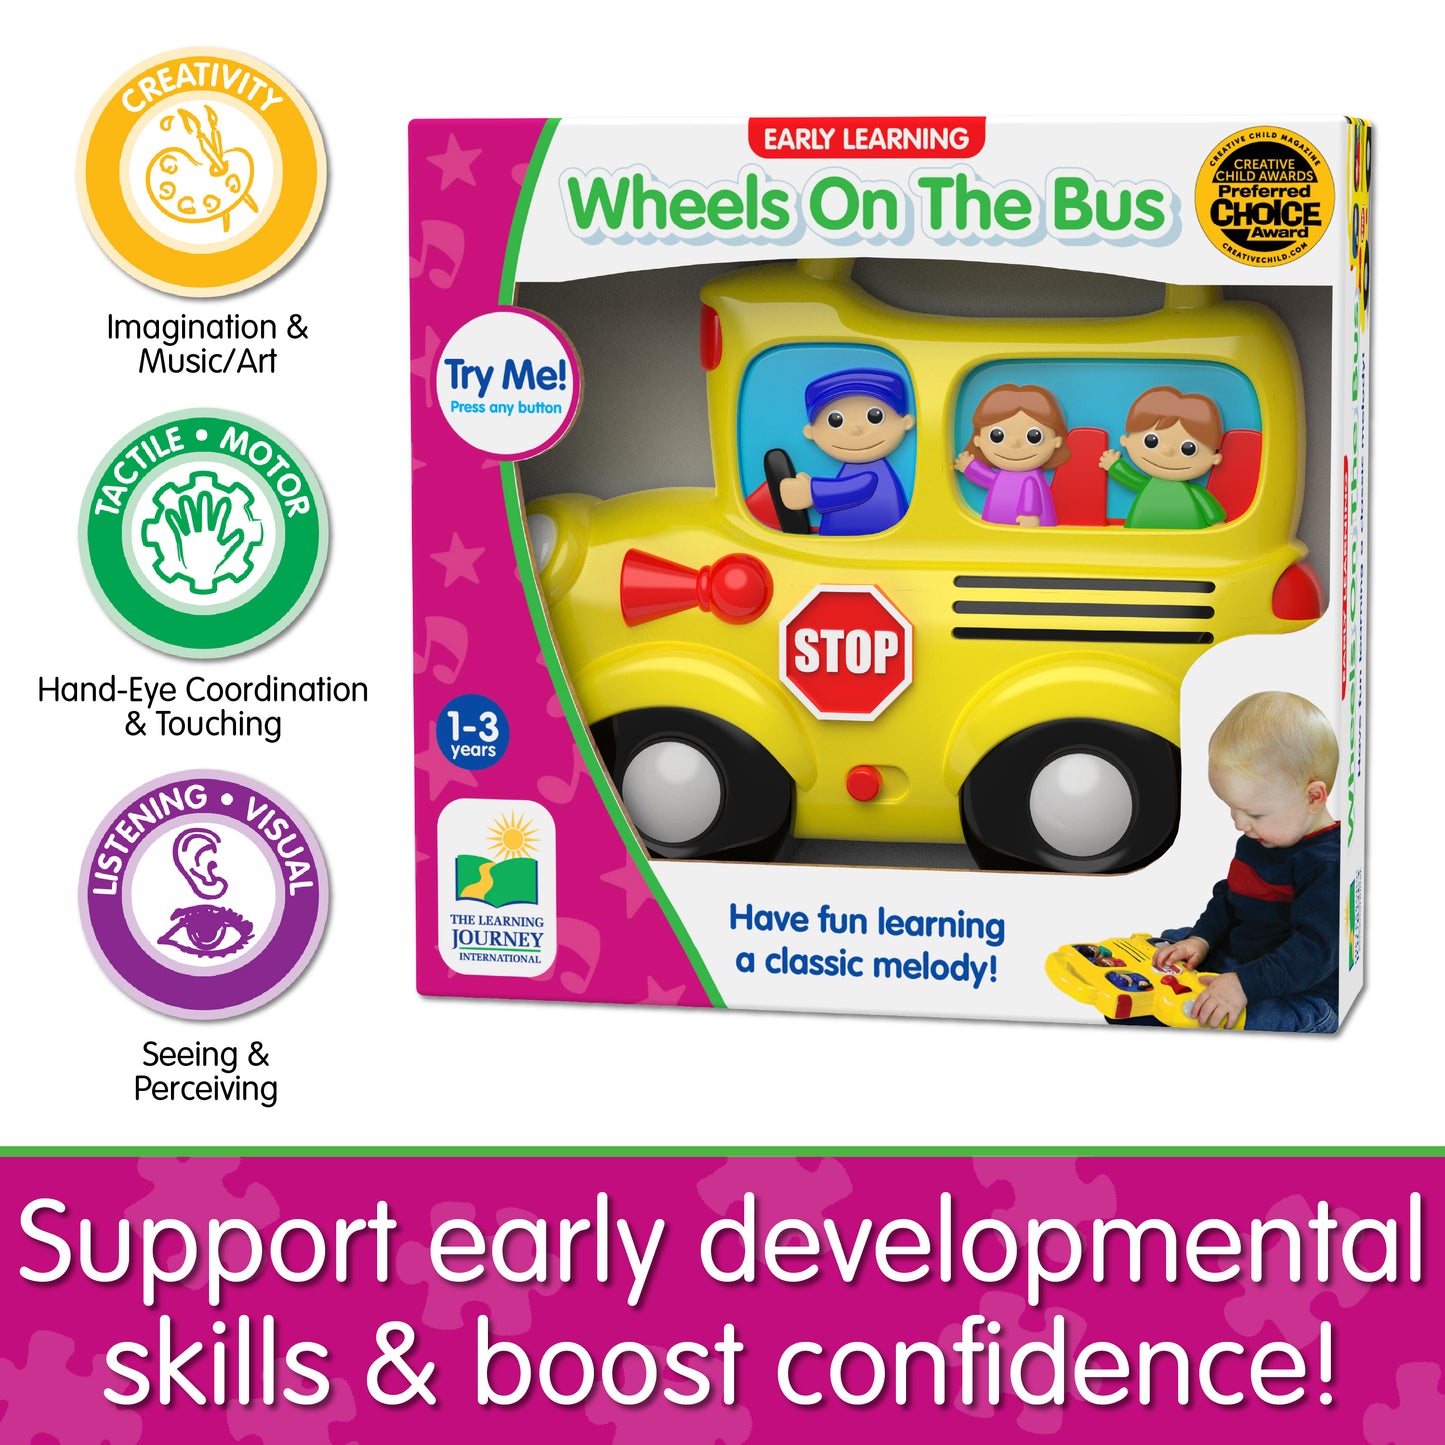 Infographic of Wheels On The Bus's educational benefits that reads, "Support early developmental skills and boost confidence!"